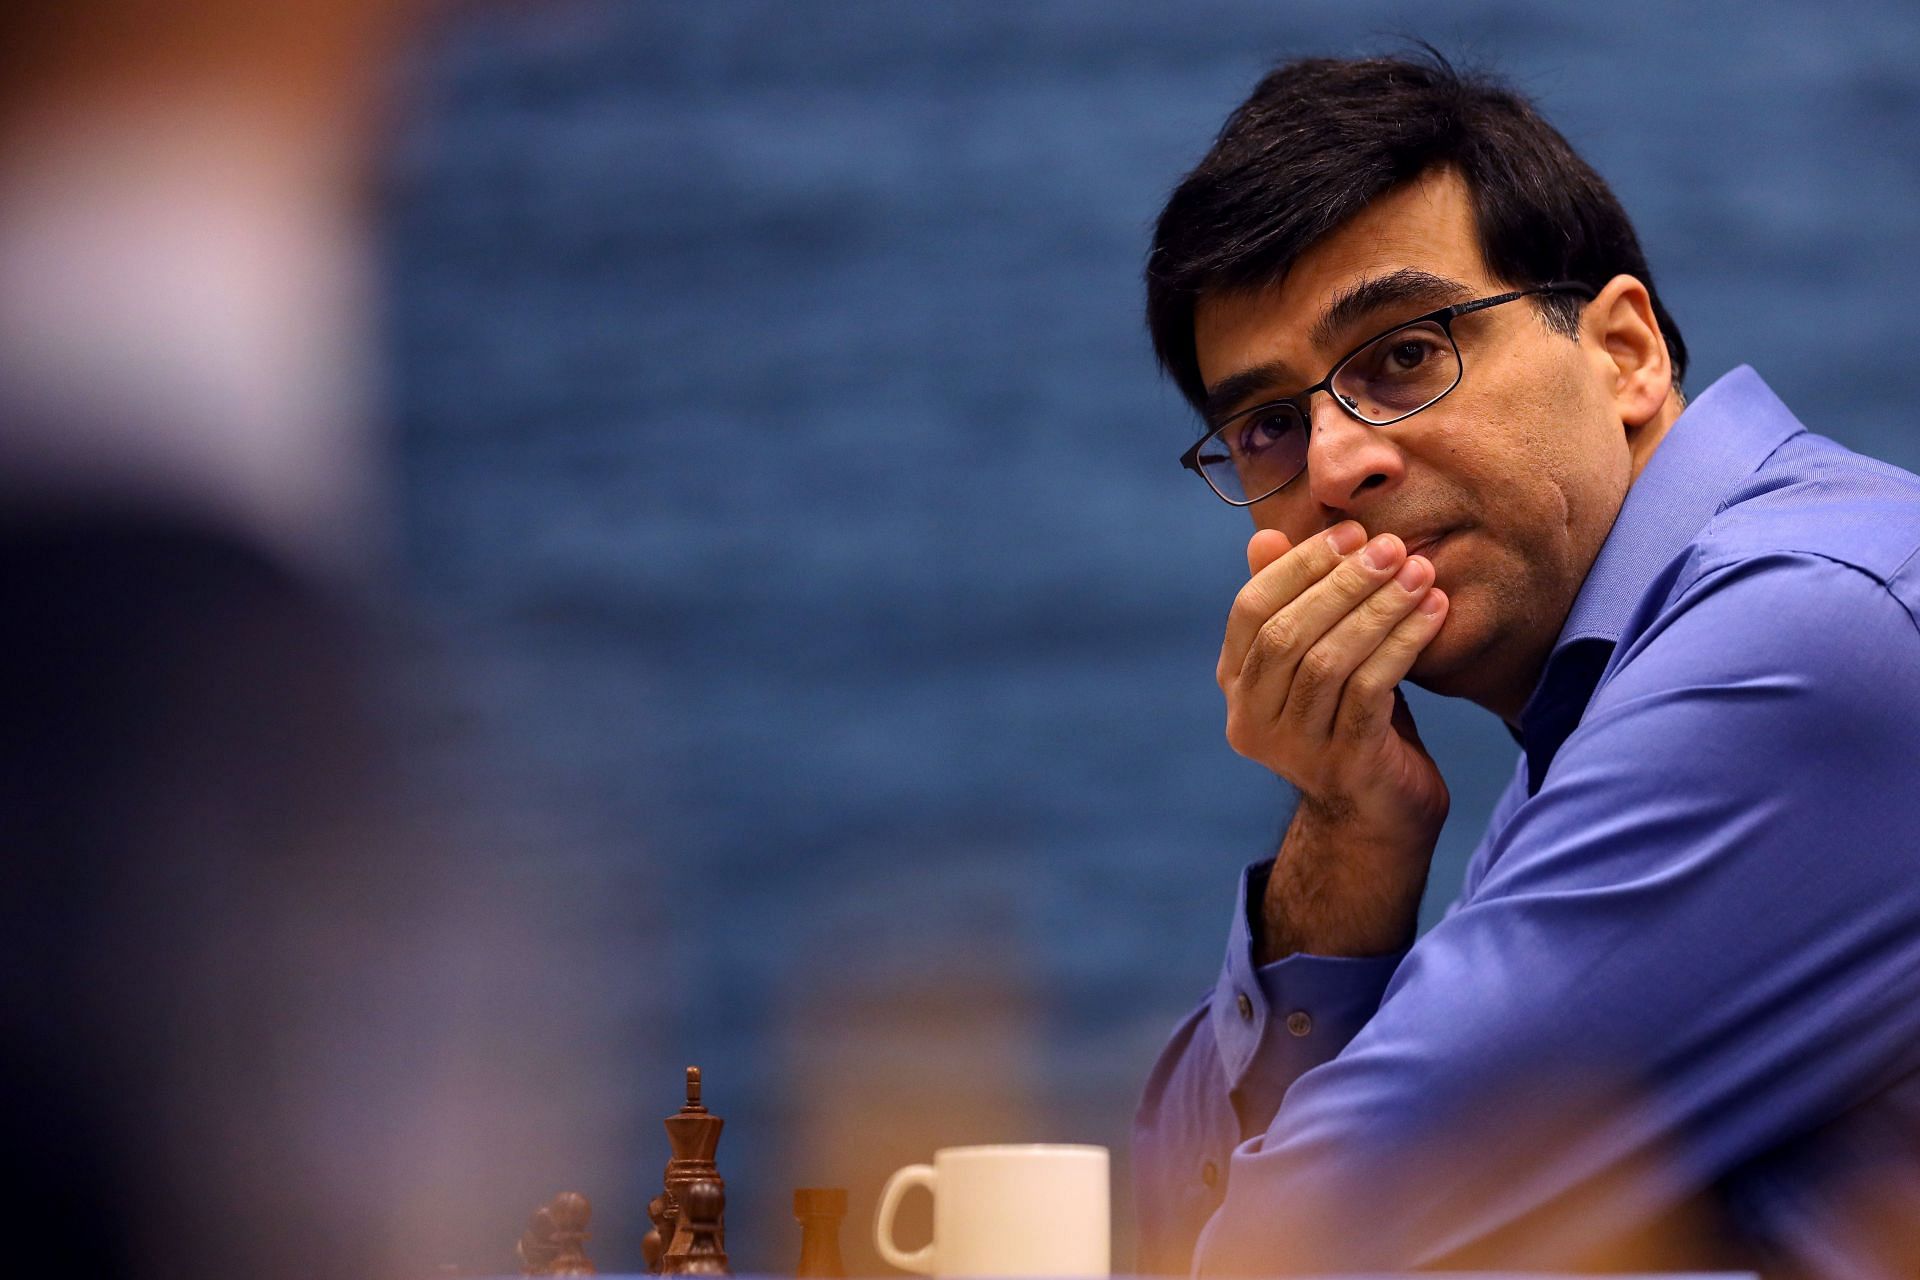 Gukesh is spearheading India's rise: Viswanathan Anand on the teenager  overtaking him in FIDE ranking - The Hindu